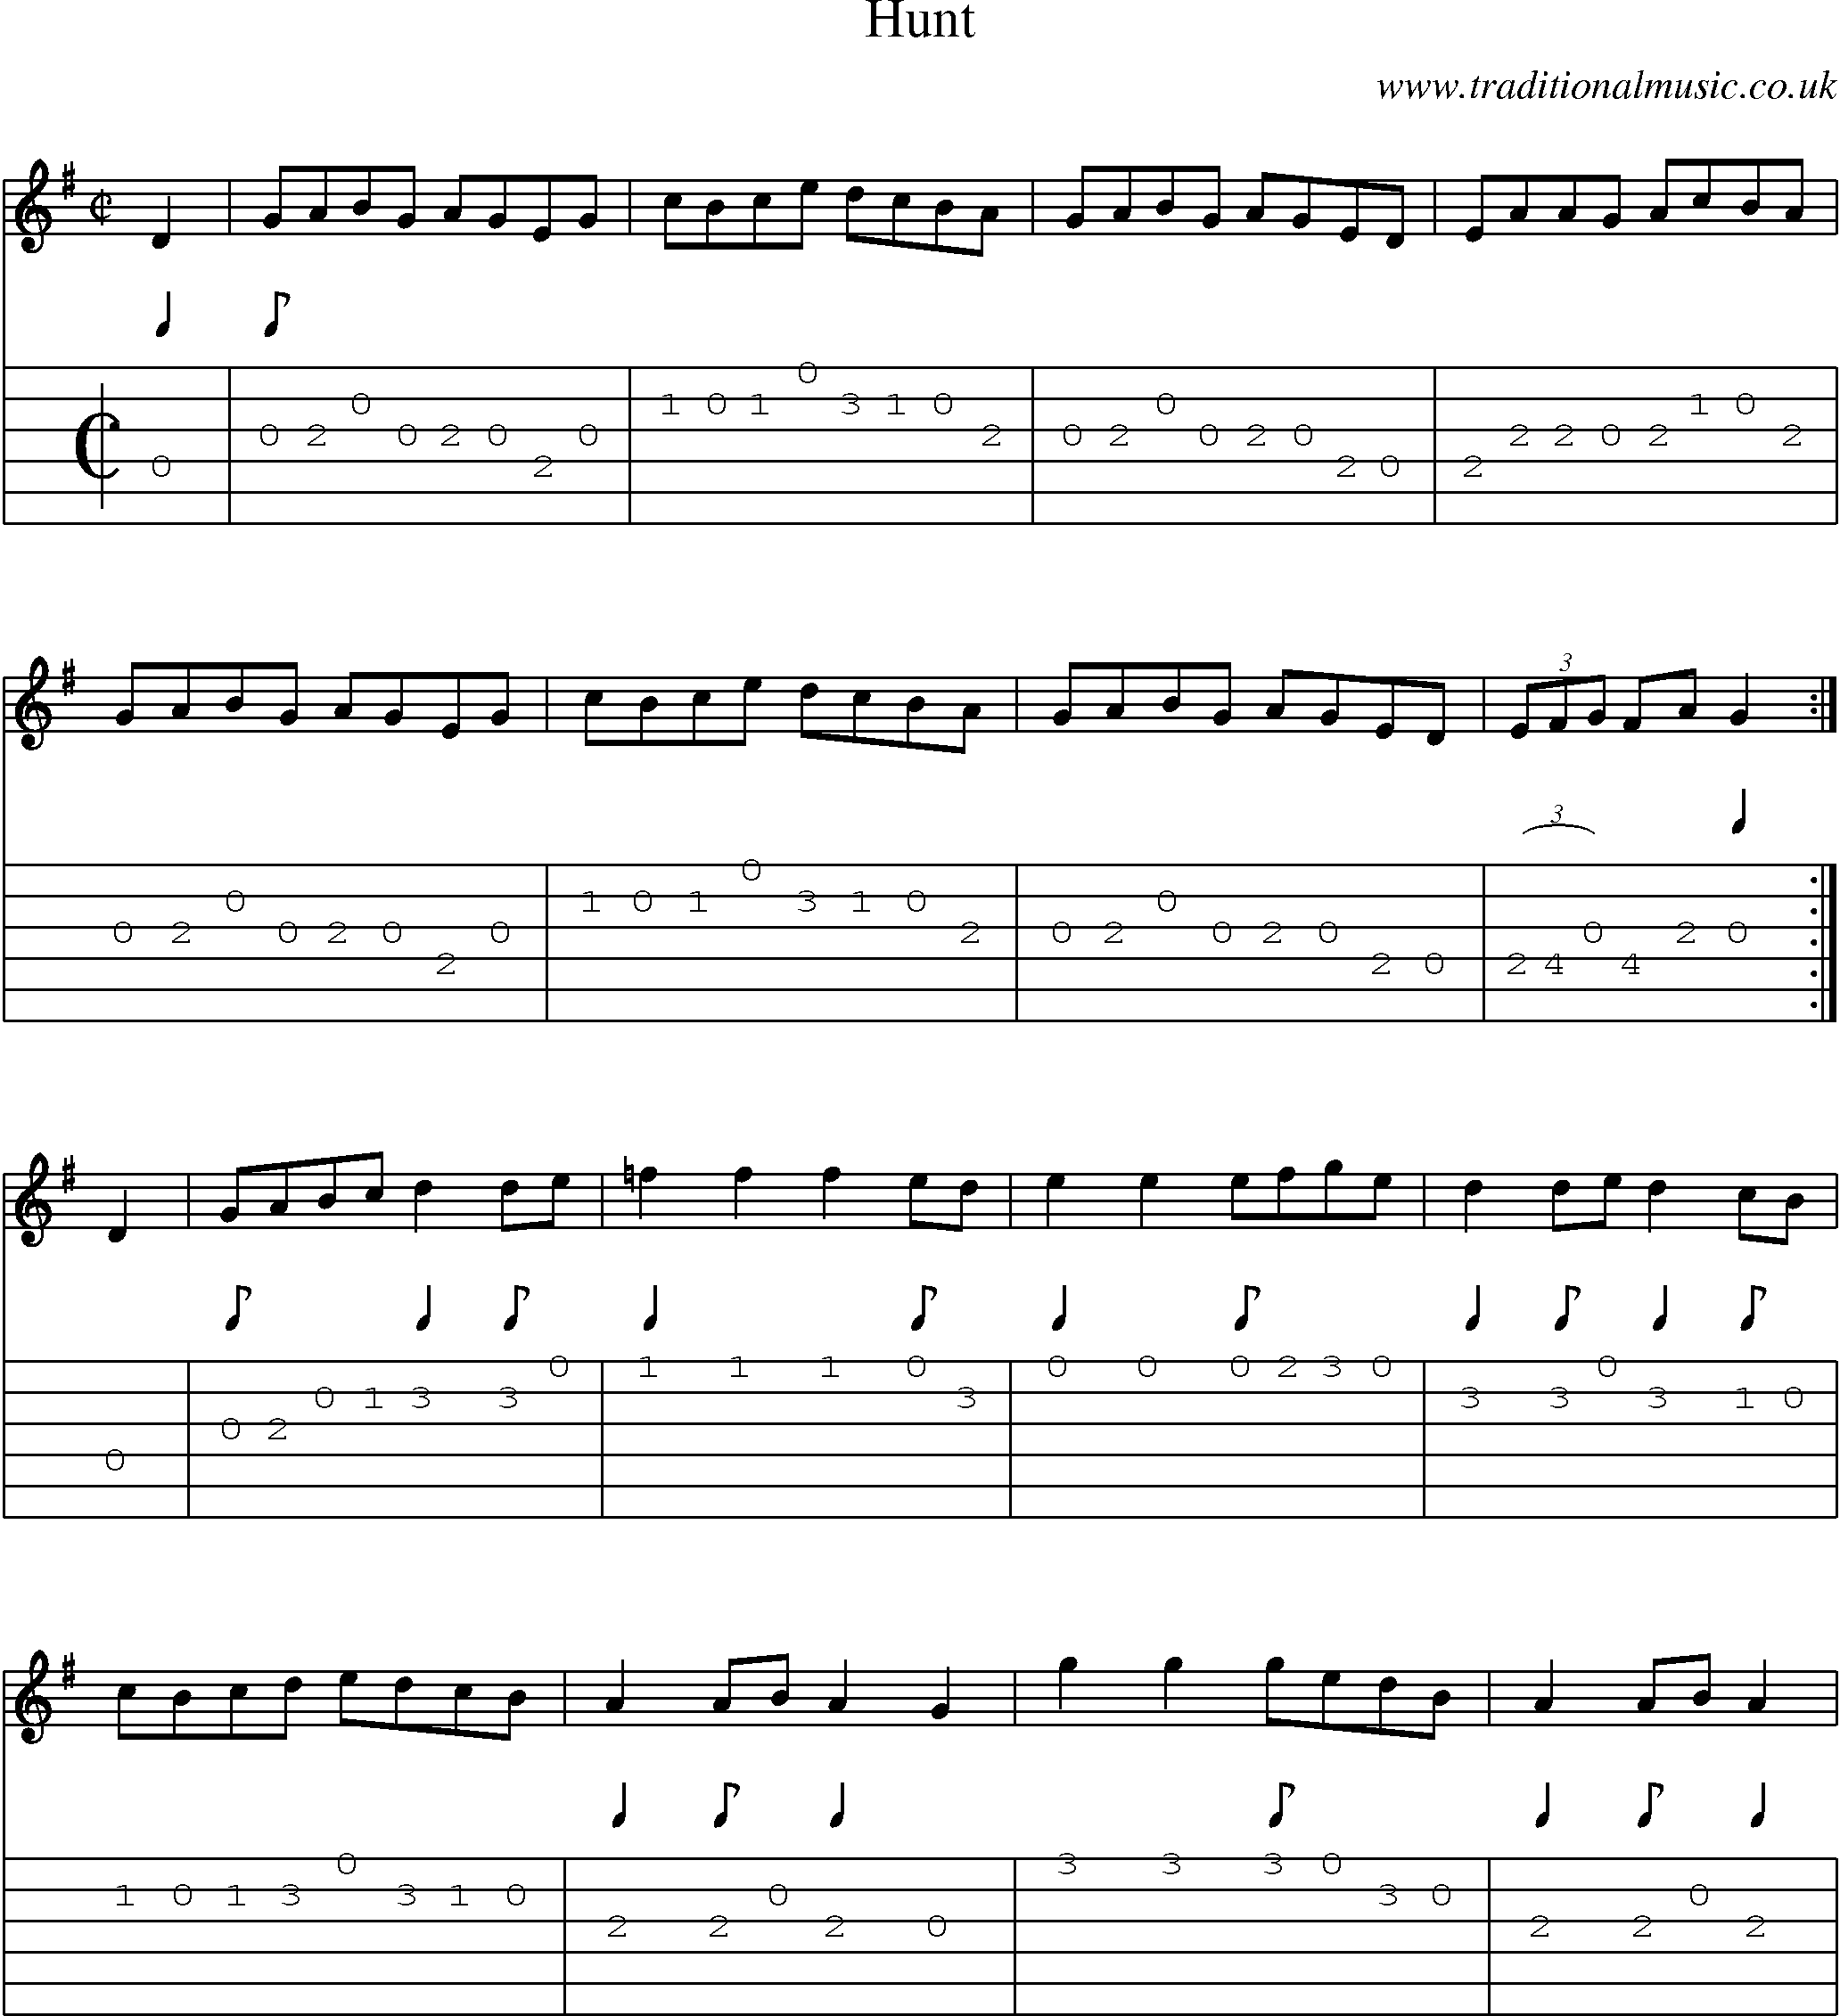 Music Score and Guitar Tabs for Hunt